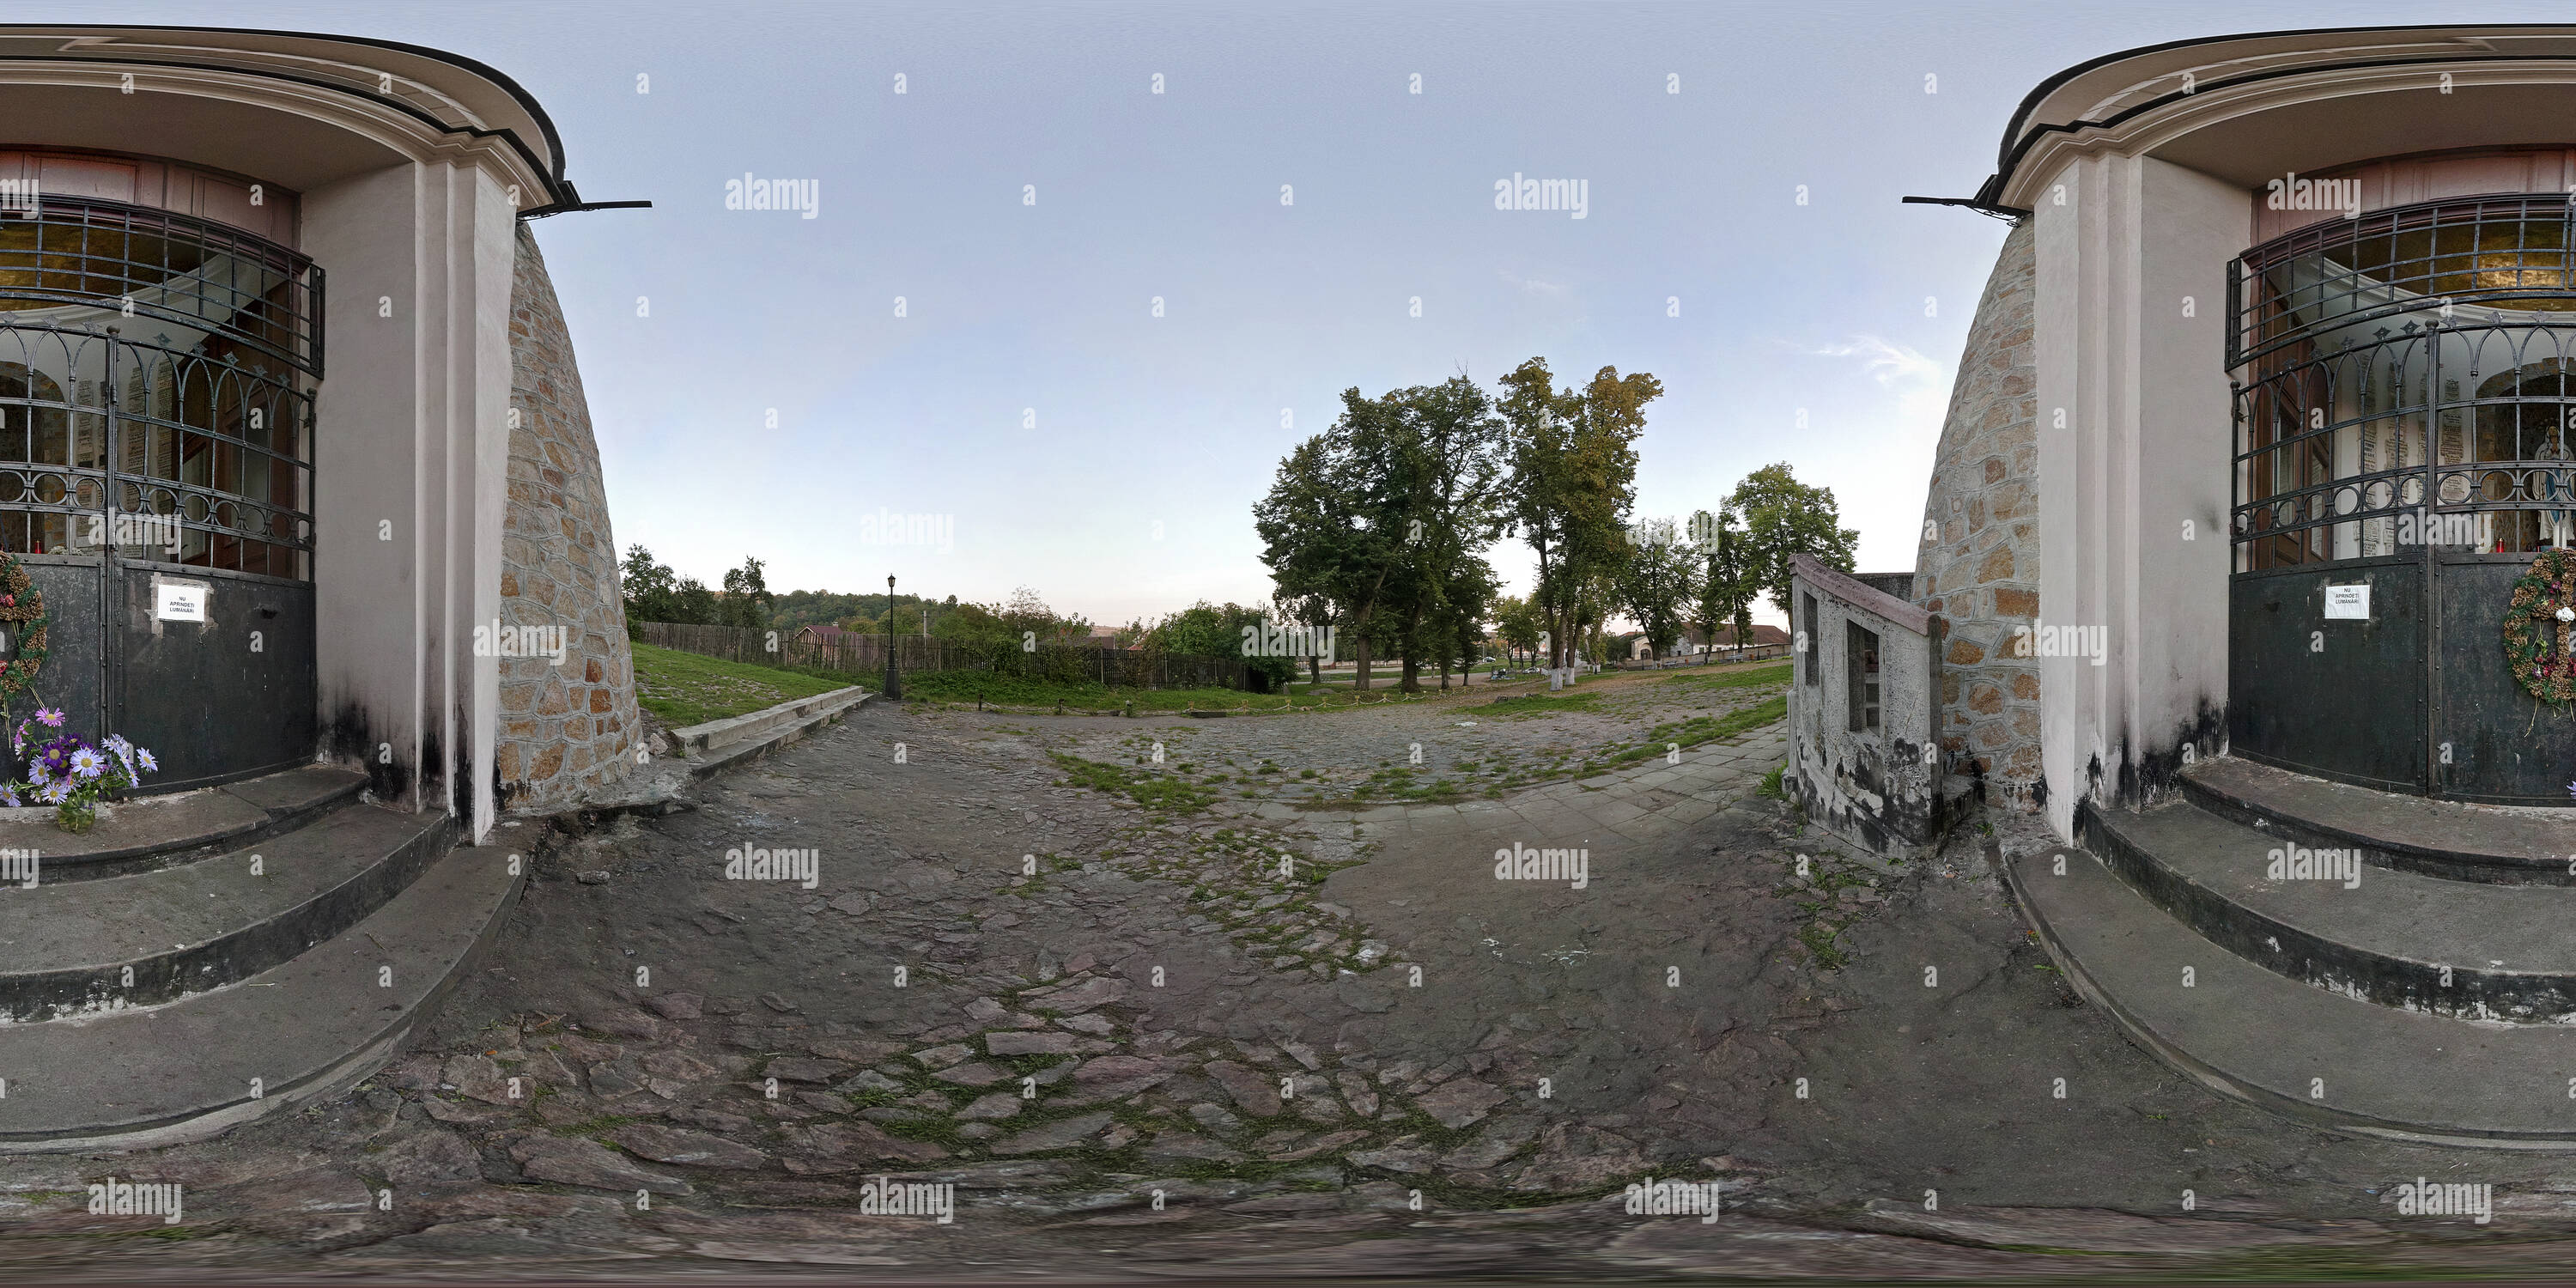 360 degree panoramic view of Mariaradna - Franciscan church and shrine